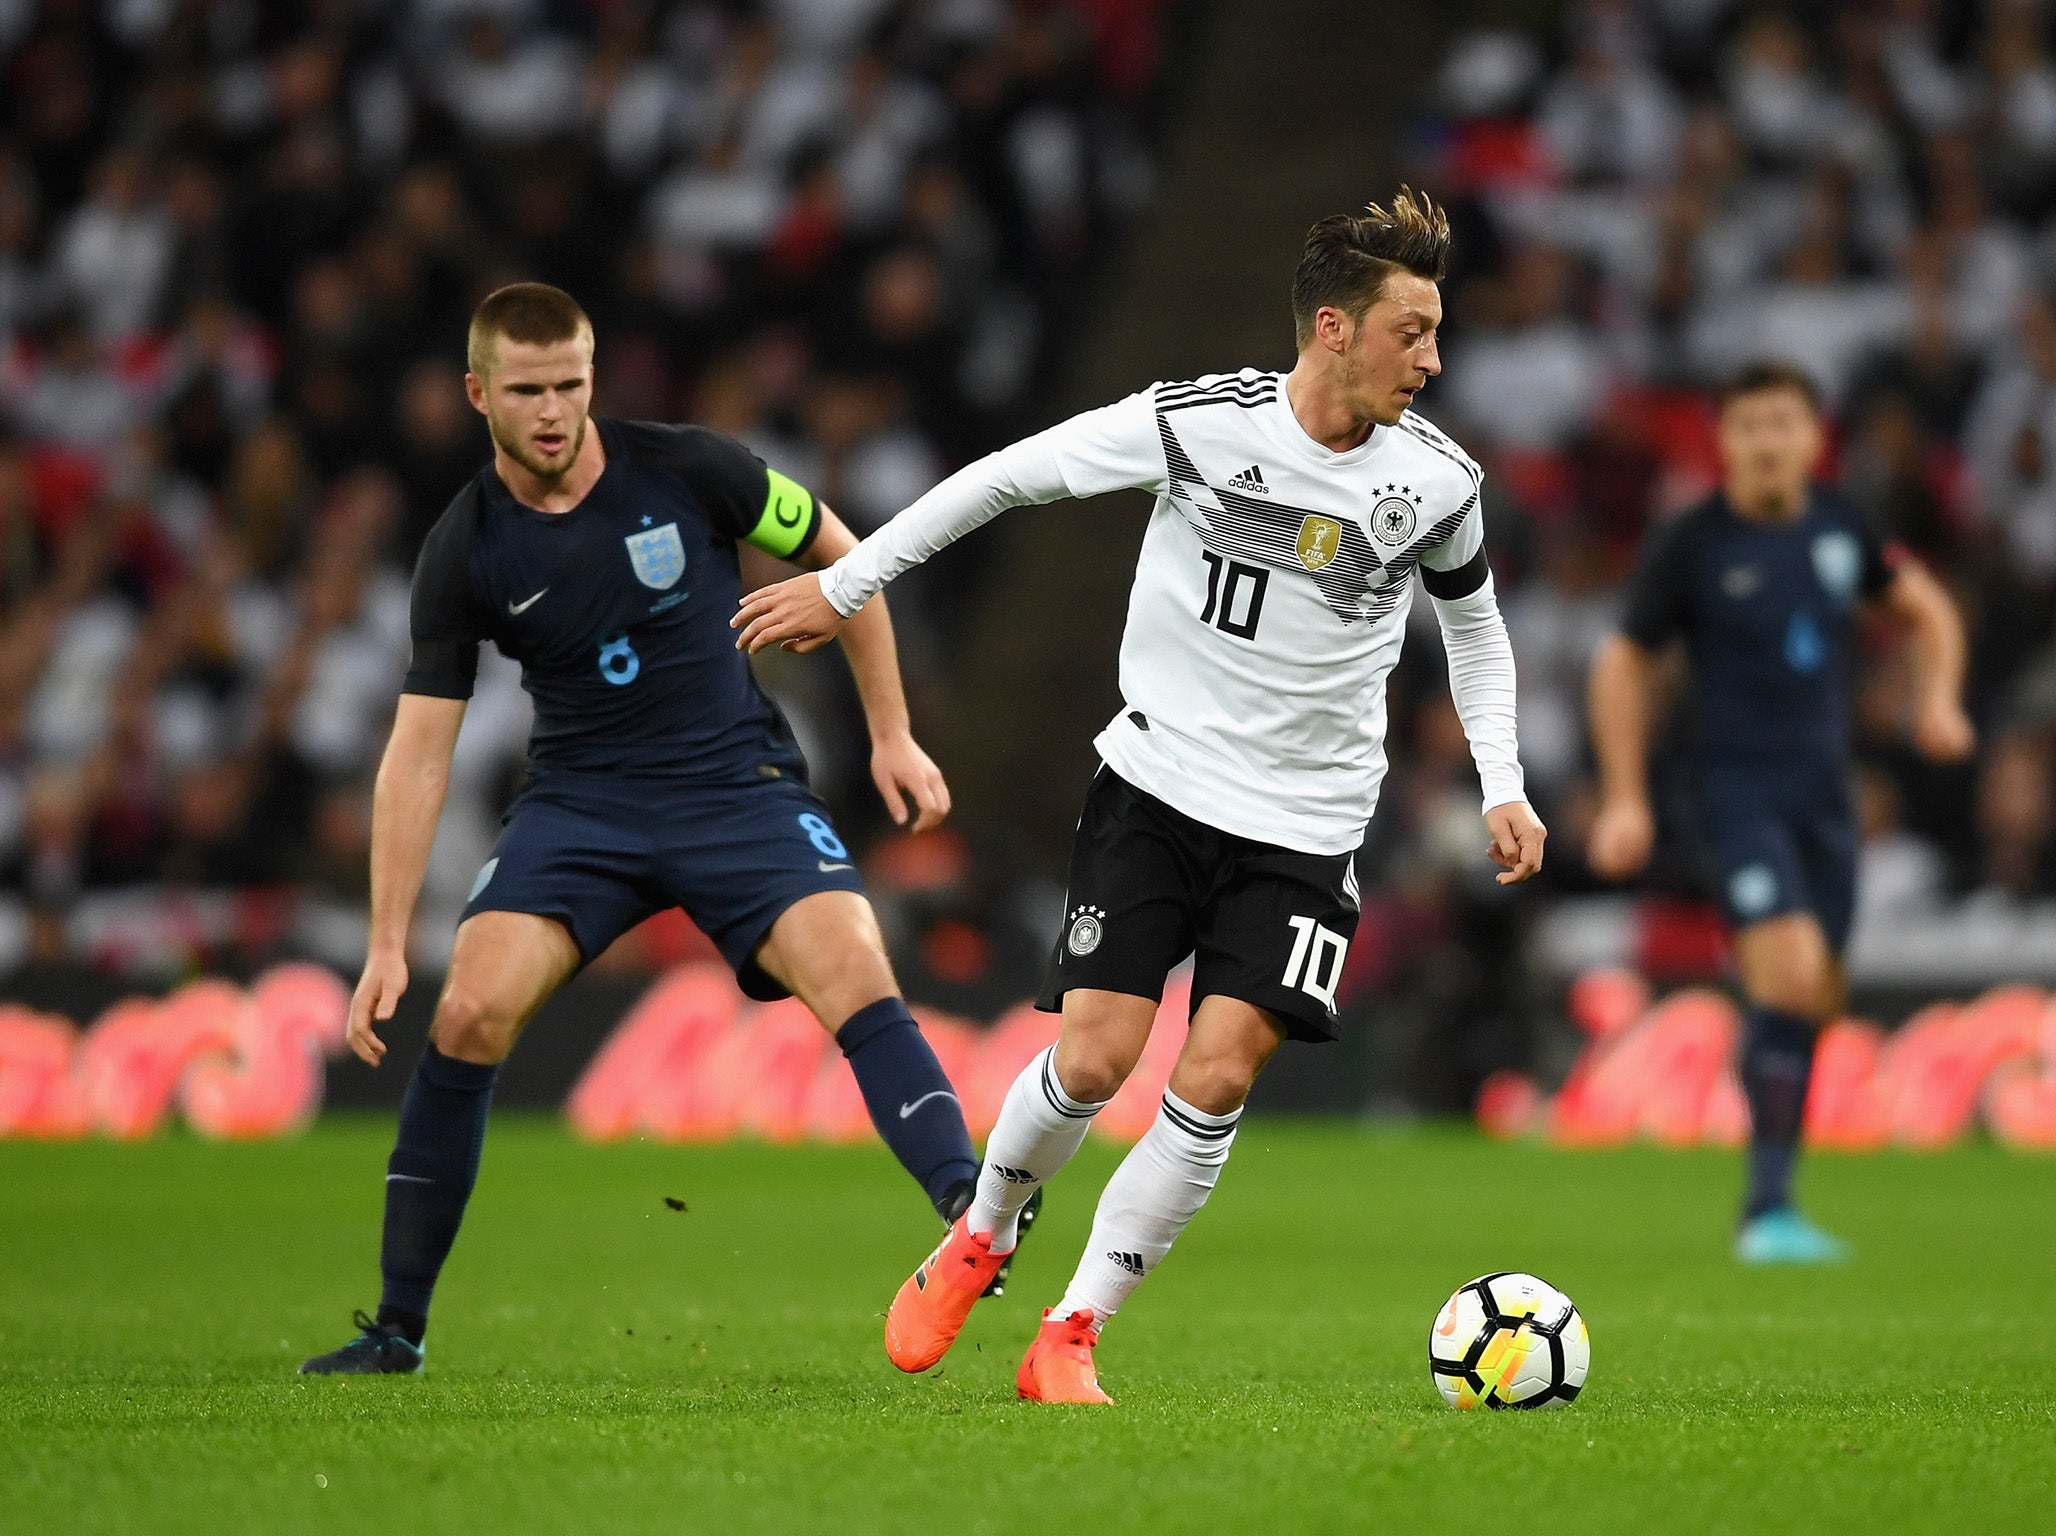 England vs Germany live: All square at half-time with Timo Werner and Tammy Abraham spurning chances